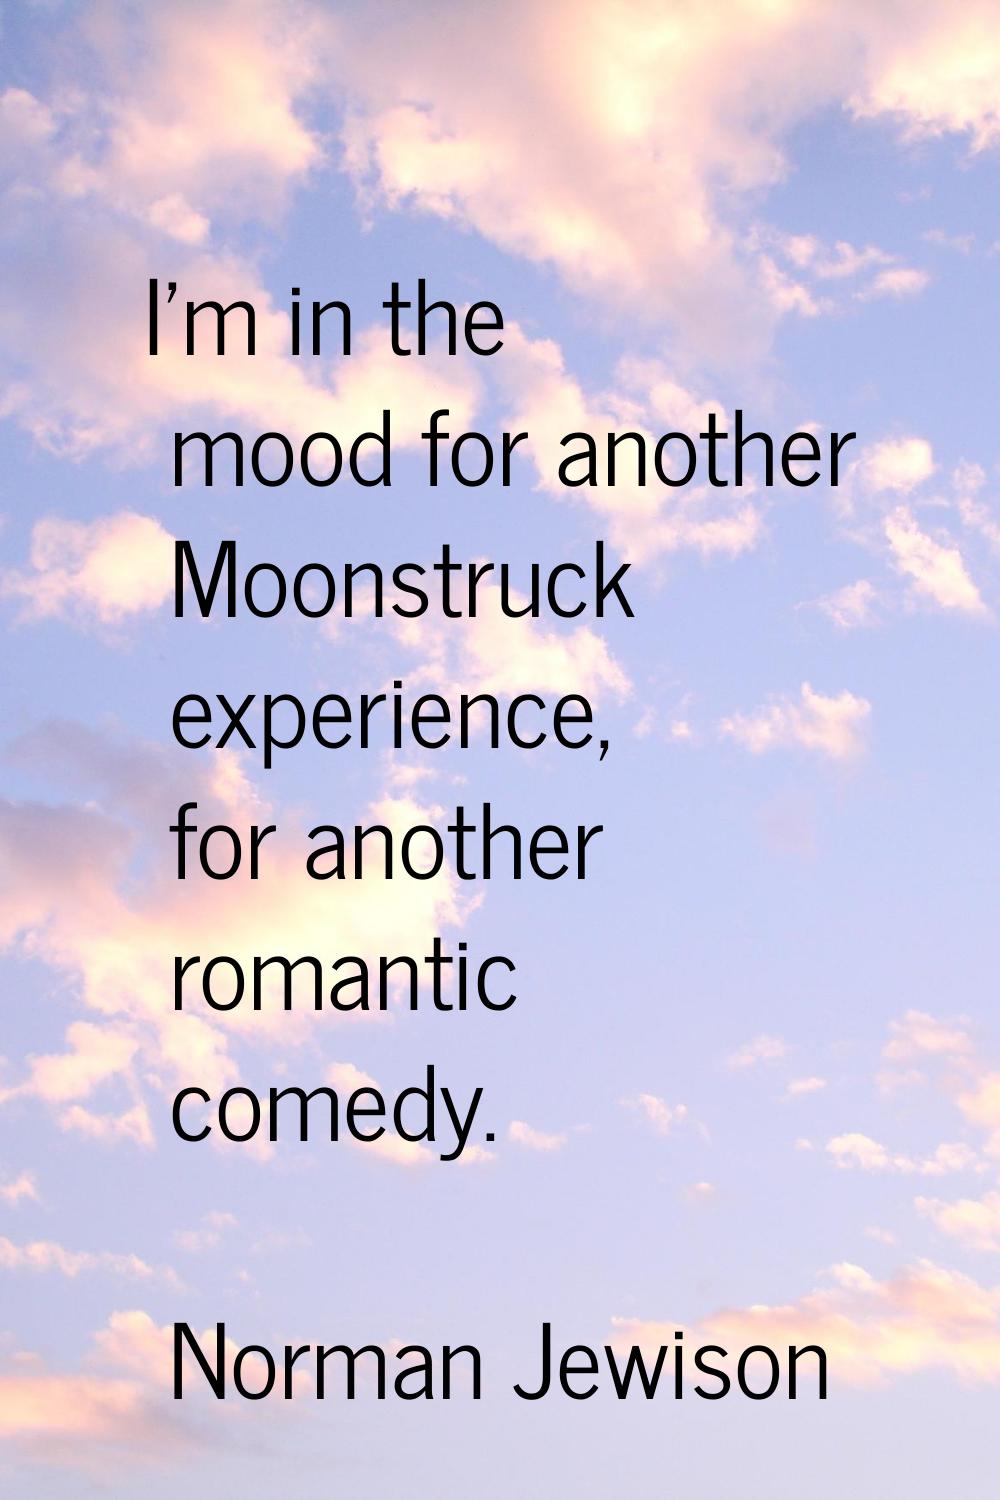 I'm in the mood for another Moonstruck experience, for another romantic comedy.